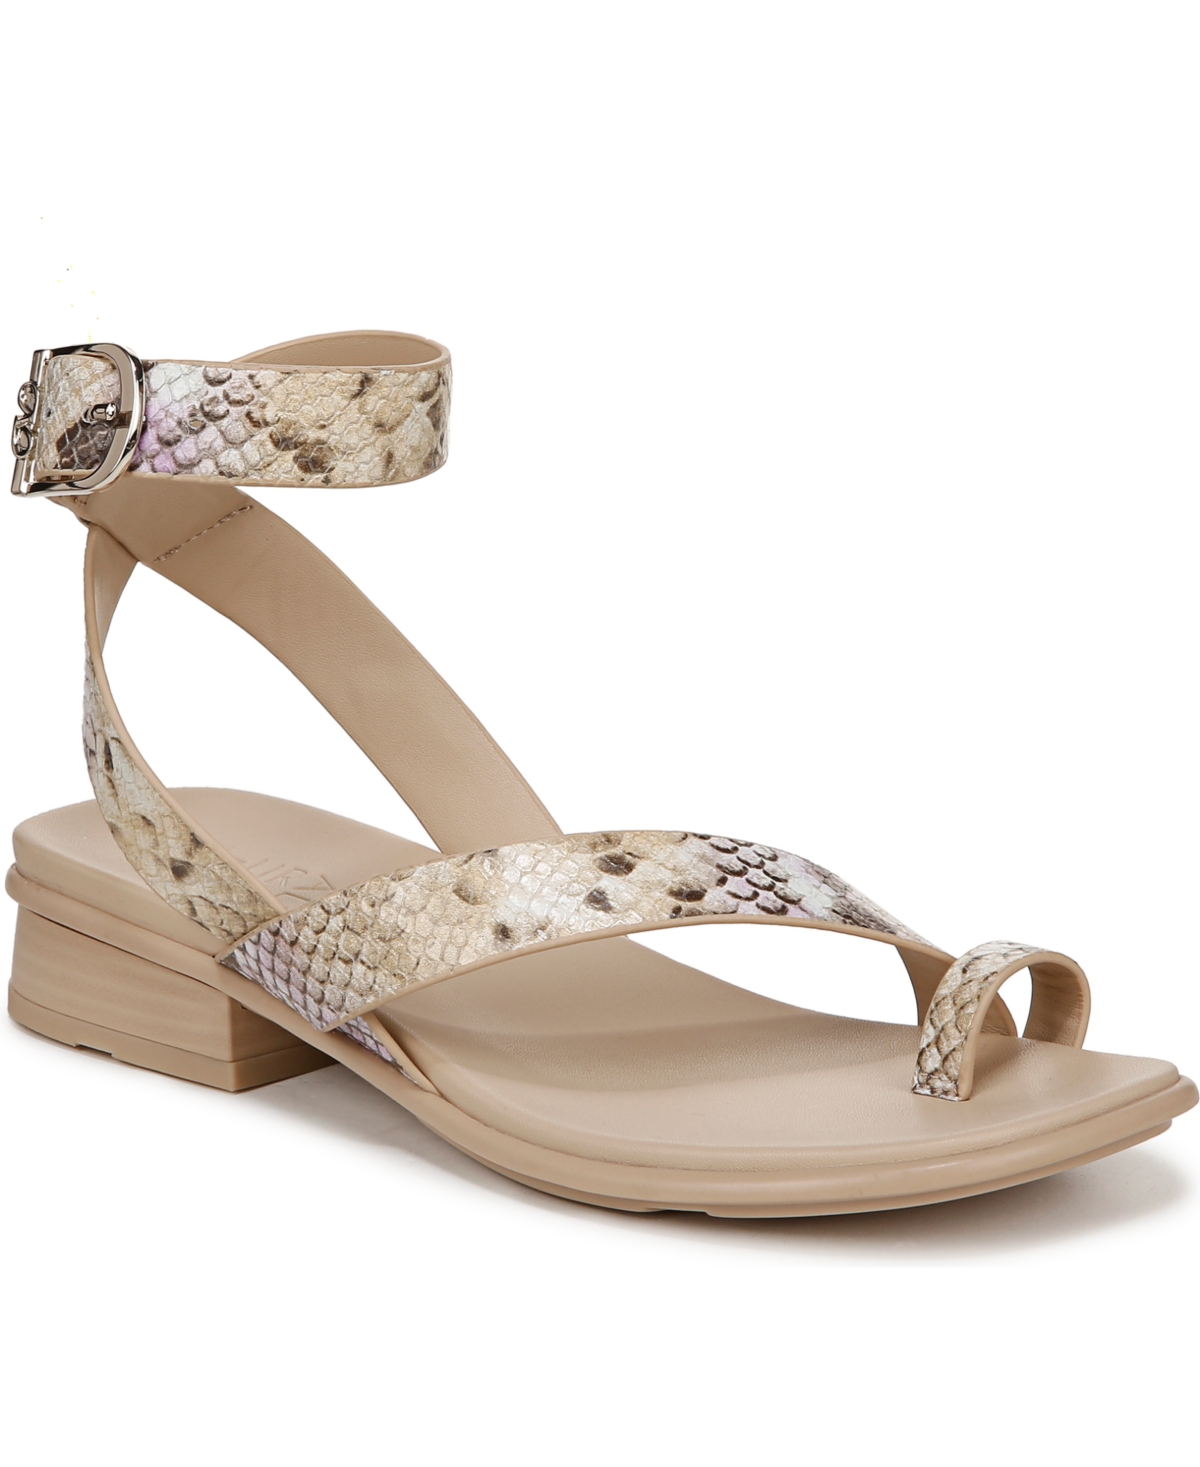 Birch Ankle Strap Sandals - Saddle Tan Leather